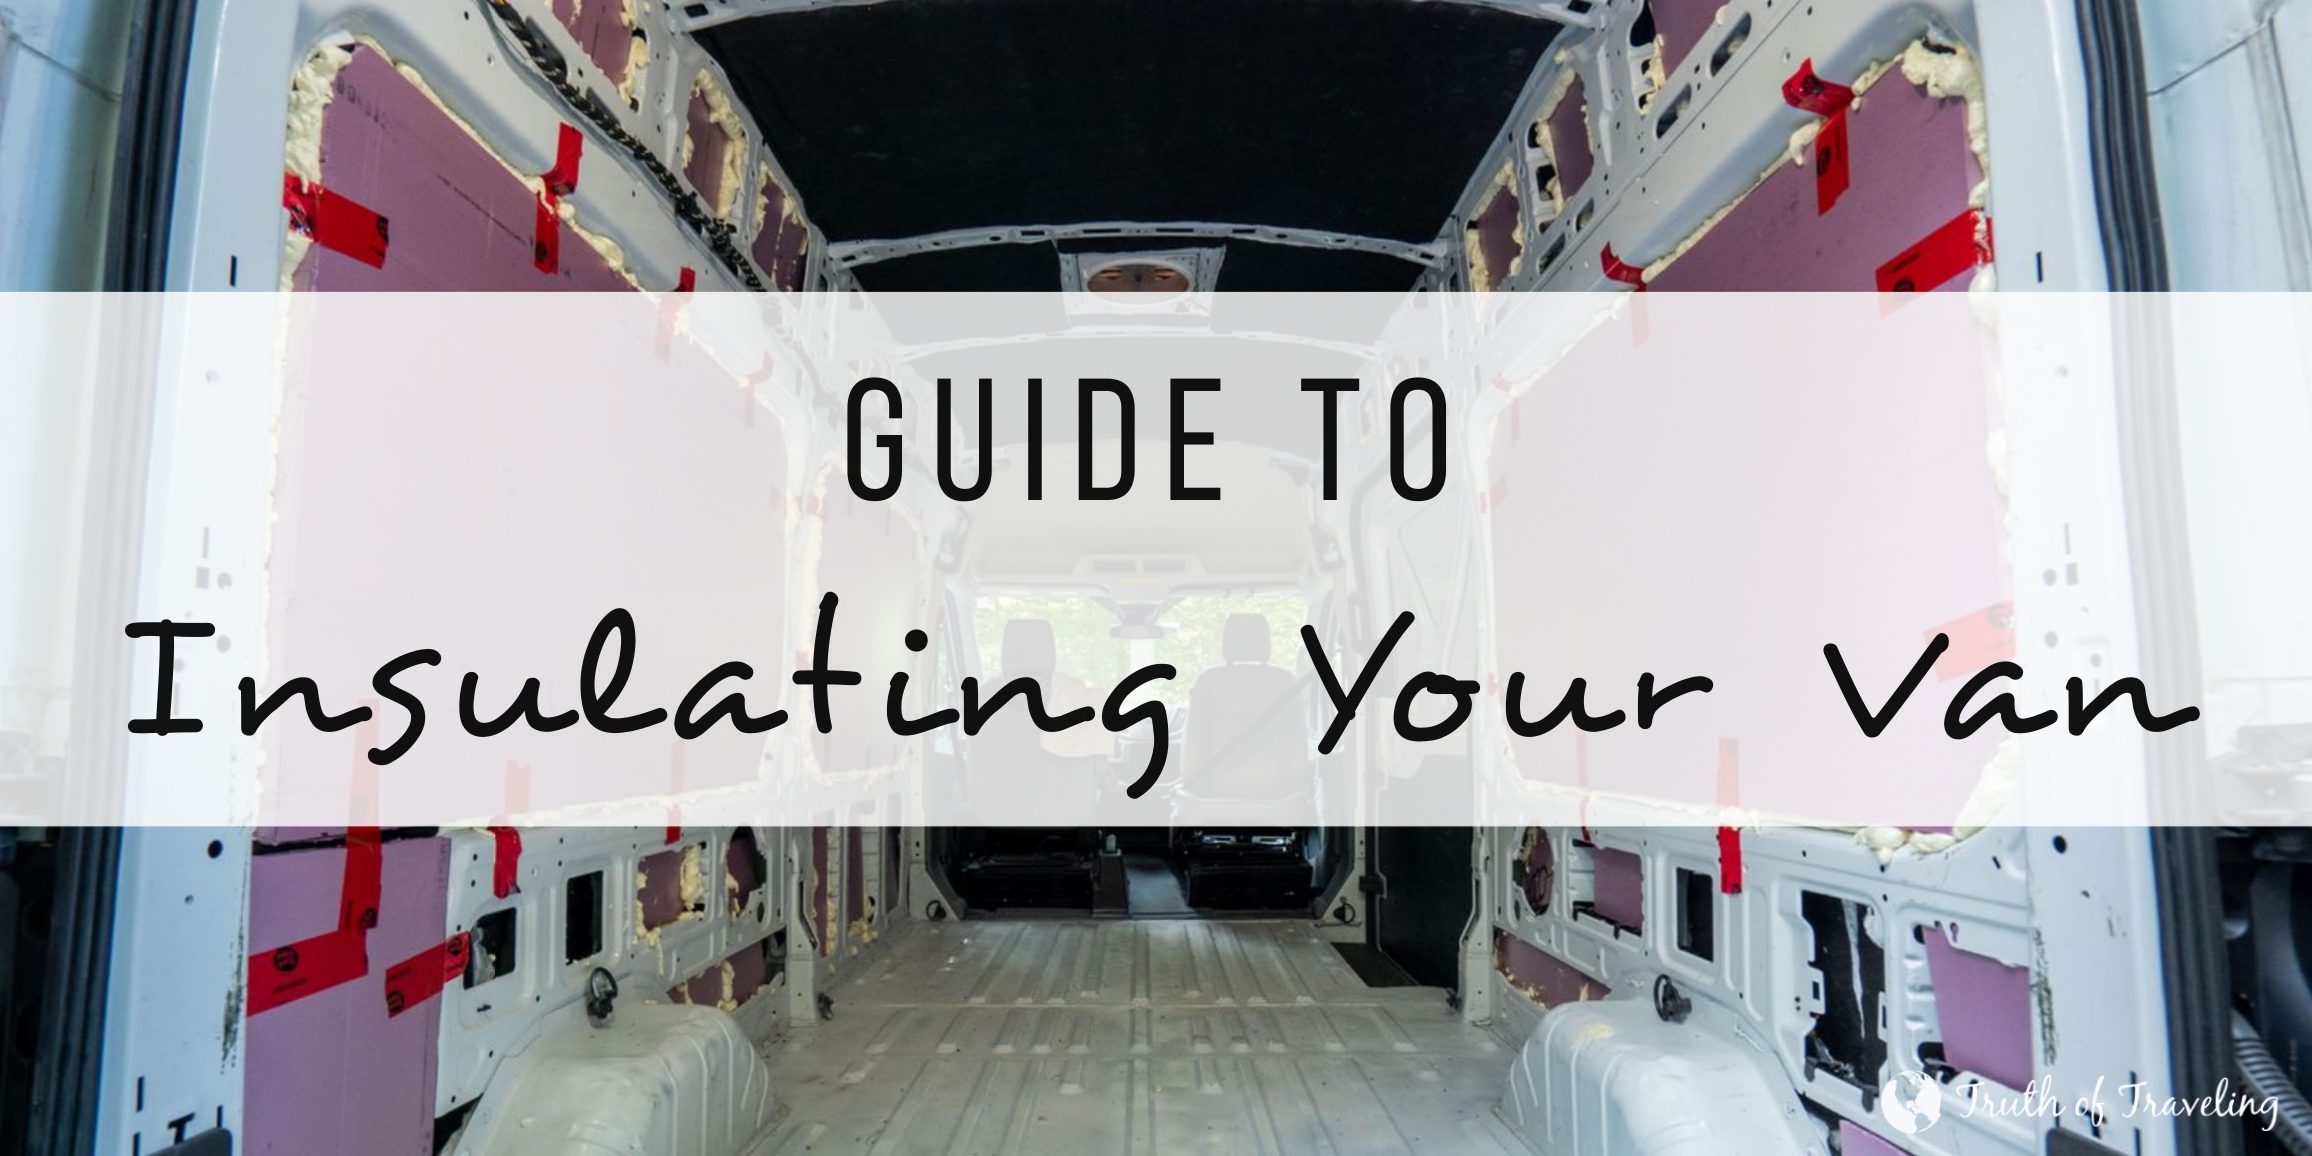 Guide to Insulating Your Van